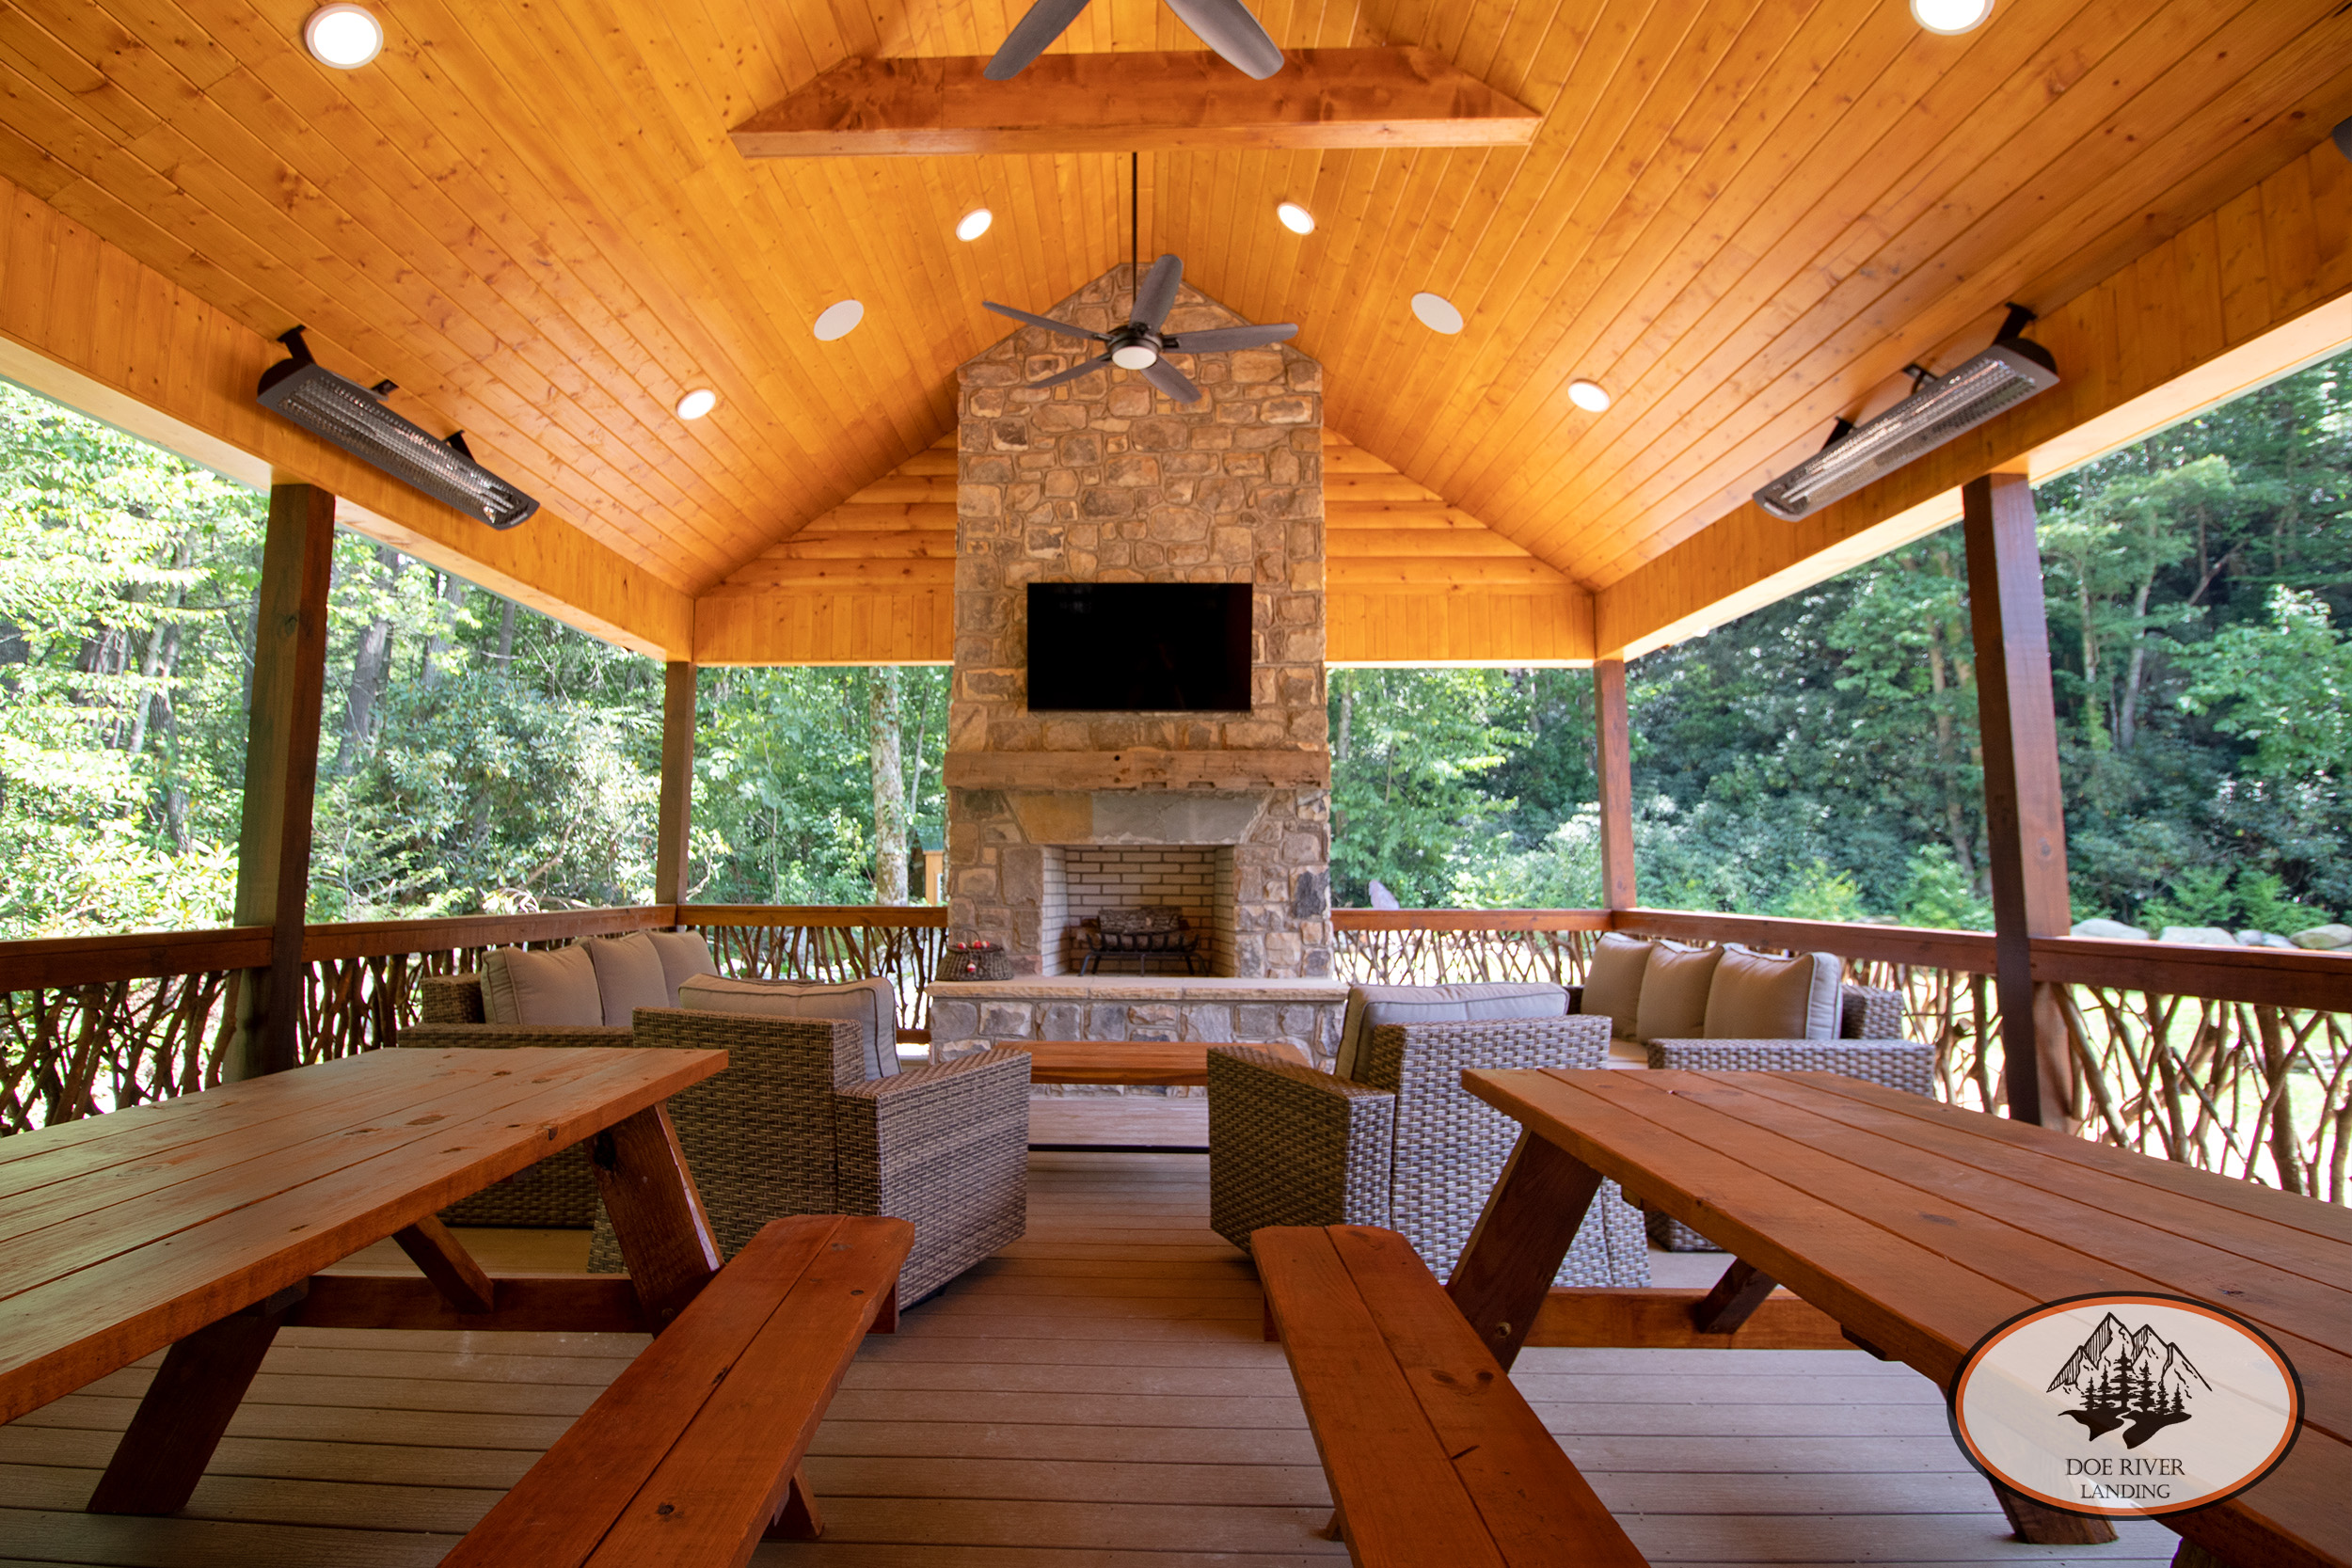 Doe River Landing campground and event venue in Roan Mountain, TN. Best vacation rental and event space near Elizabethton, TN and Johnson City TN. The Water's Edge Pavilion is the perfect riverfront venue for birthday parties, ceremonies, reunions, showers, retirement, graduation, and more.